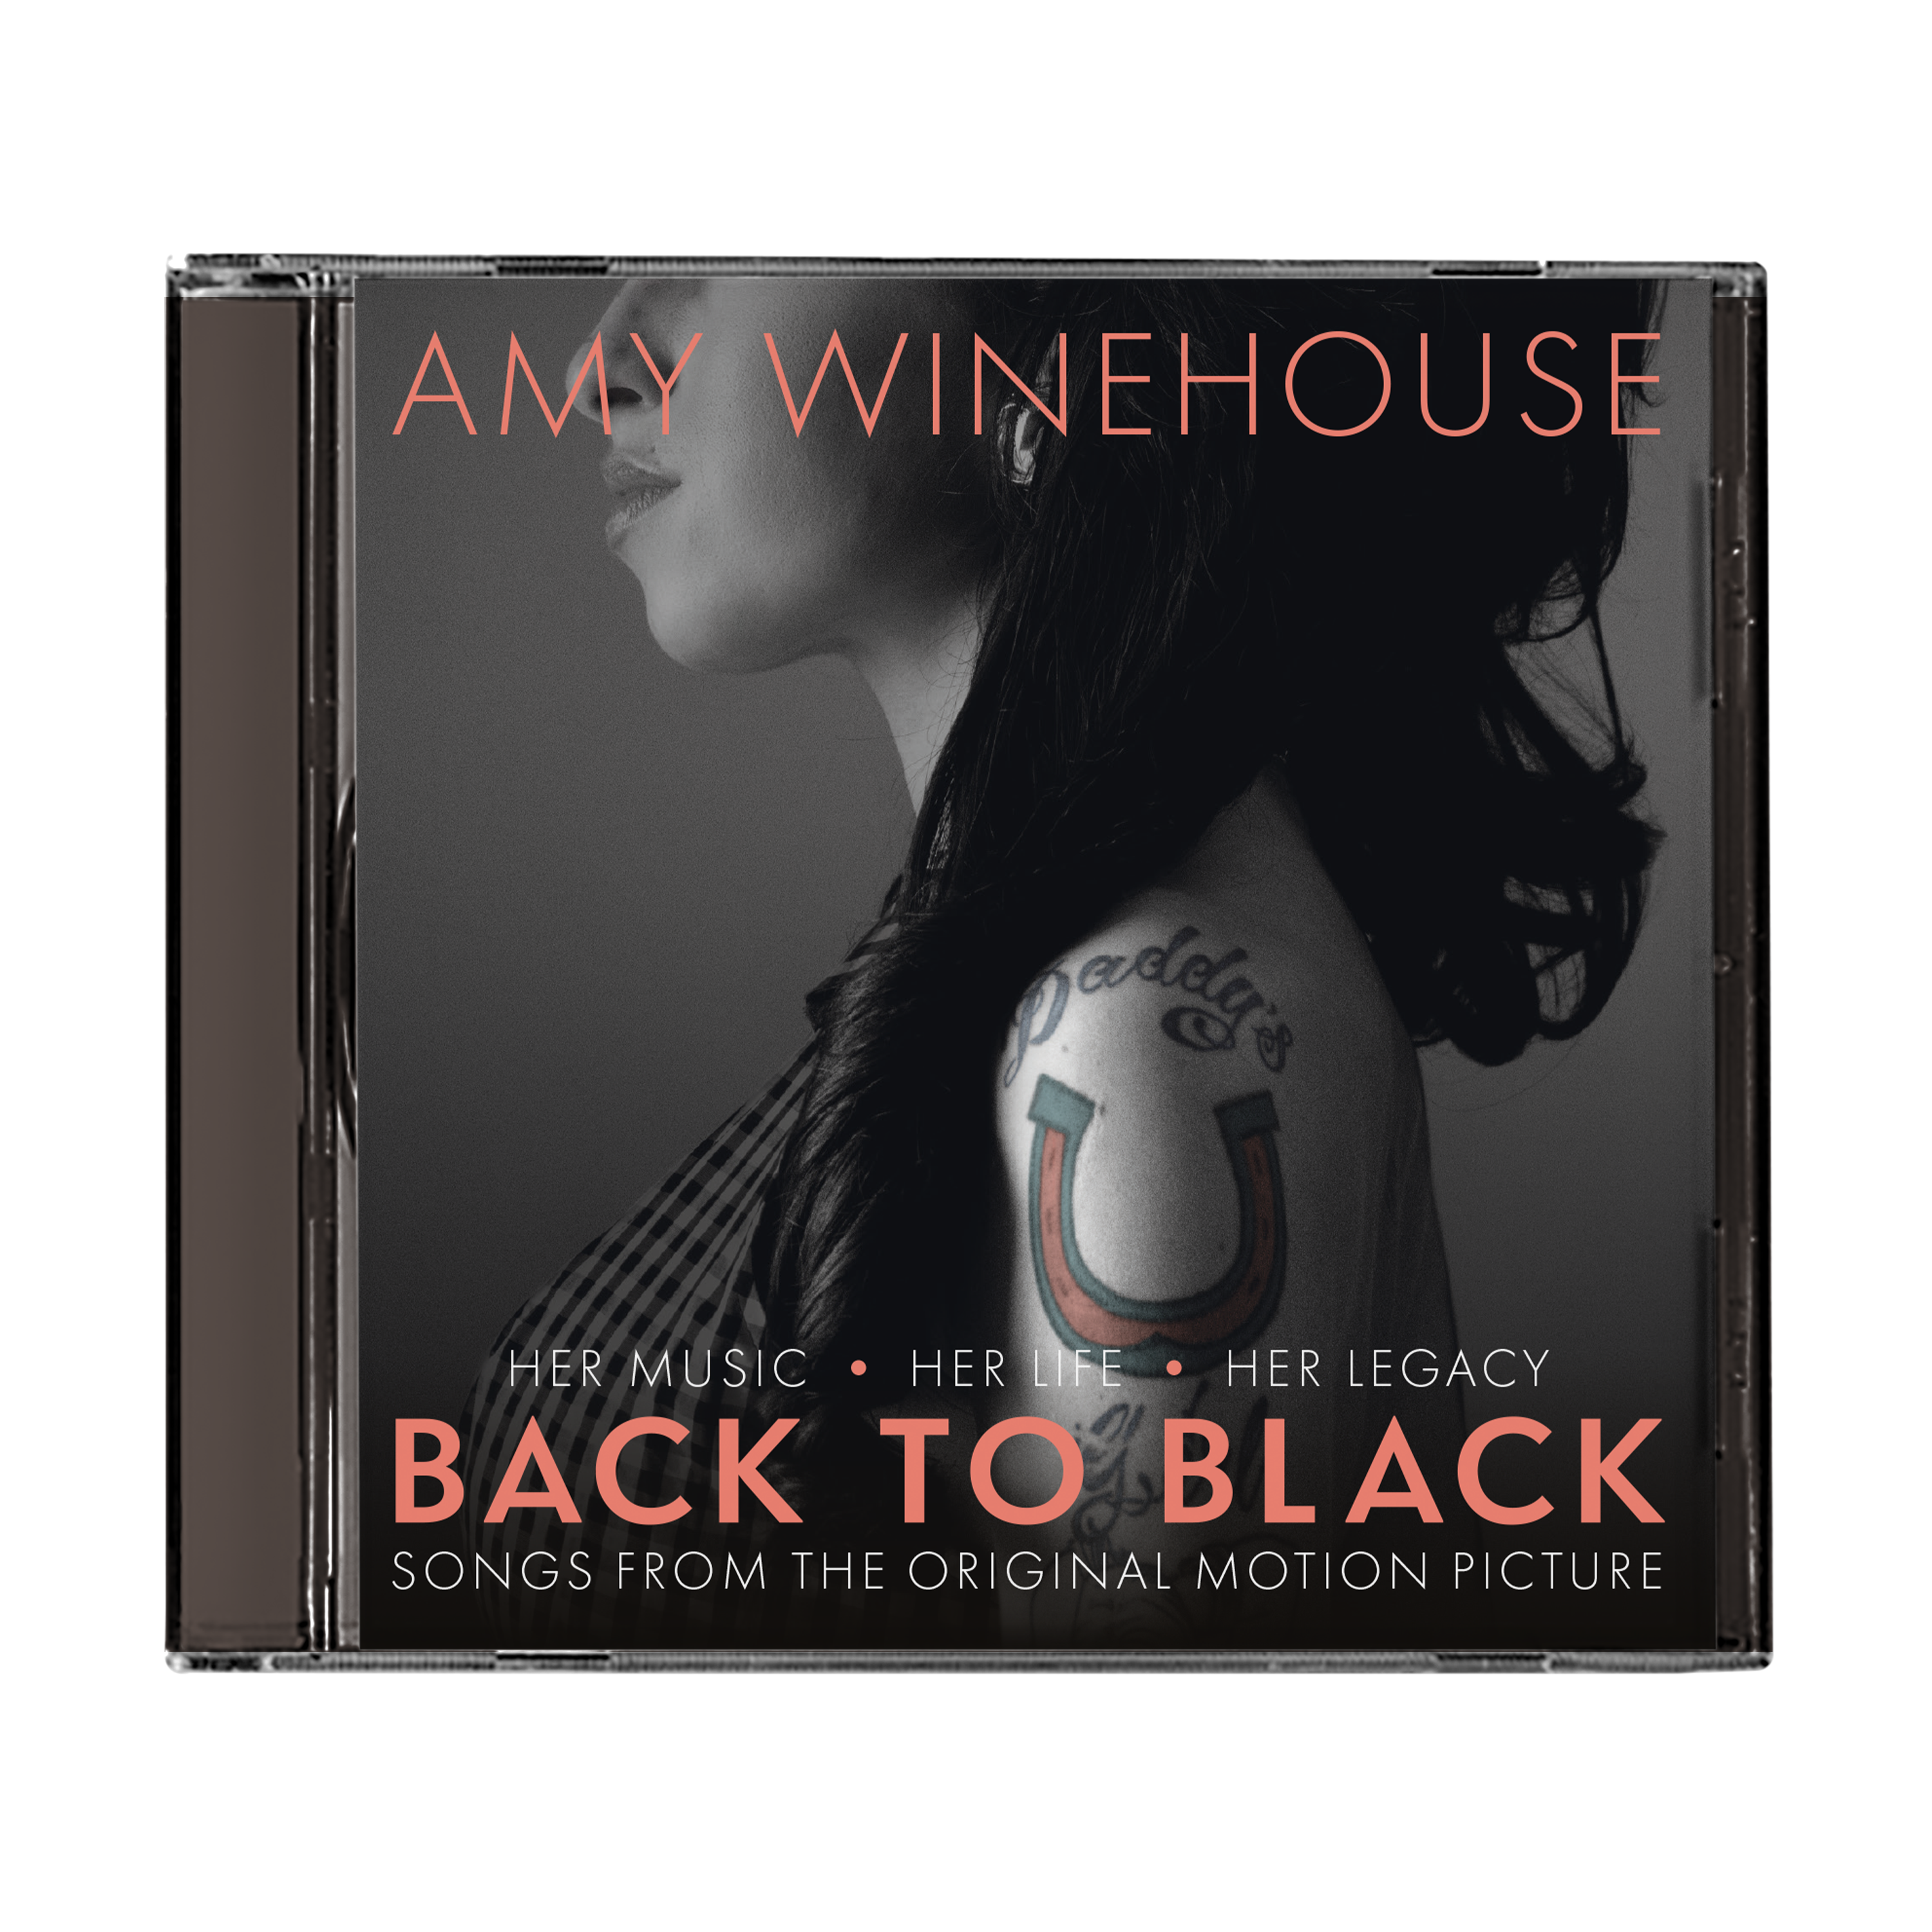 Original Soundtrack - Back To Black - Songs from the Original Motion Picture: CD